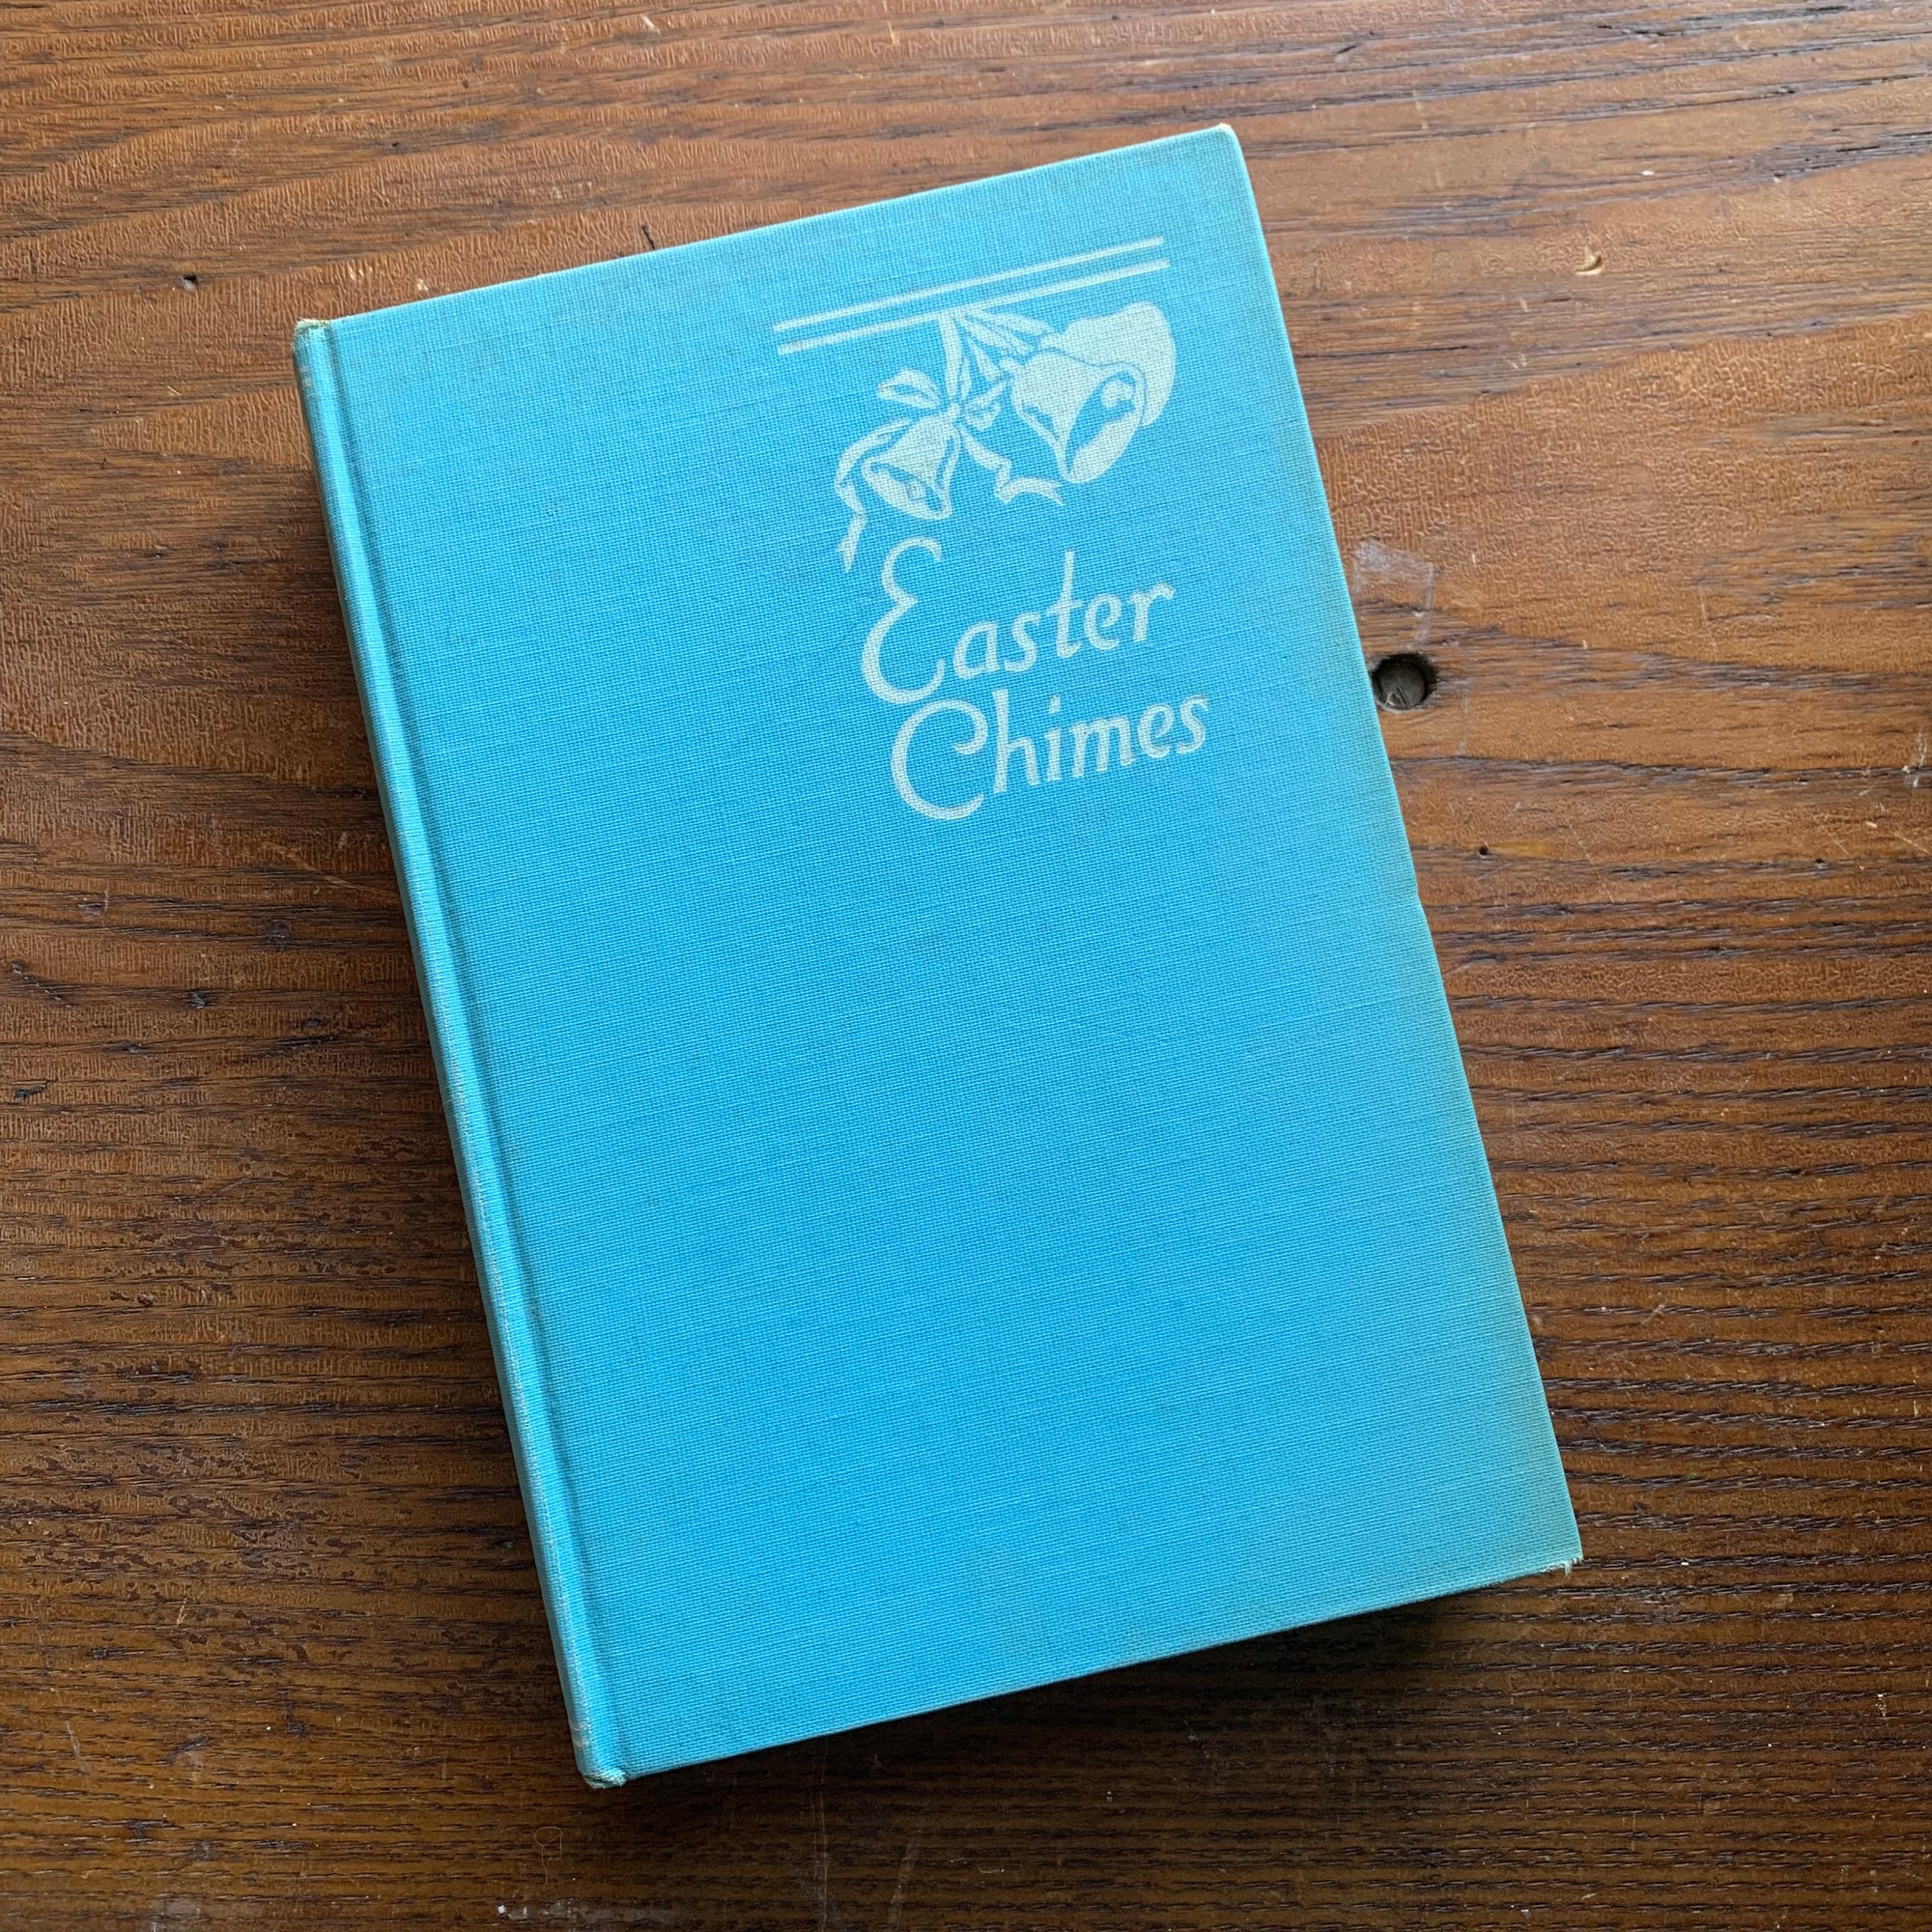 Easter Chimes - Stories for Easter and the Spring Season by Wilhelmina Harper - 1942 First Edition